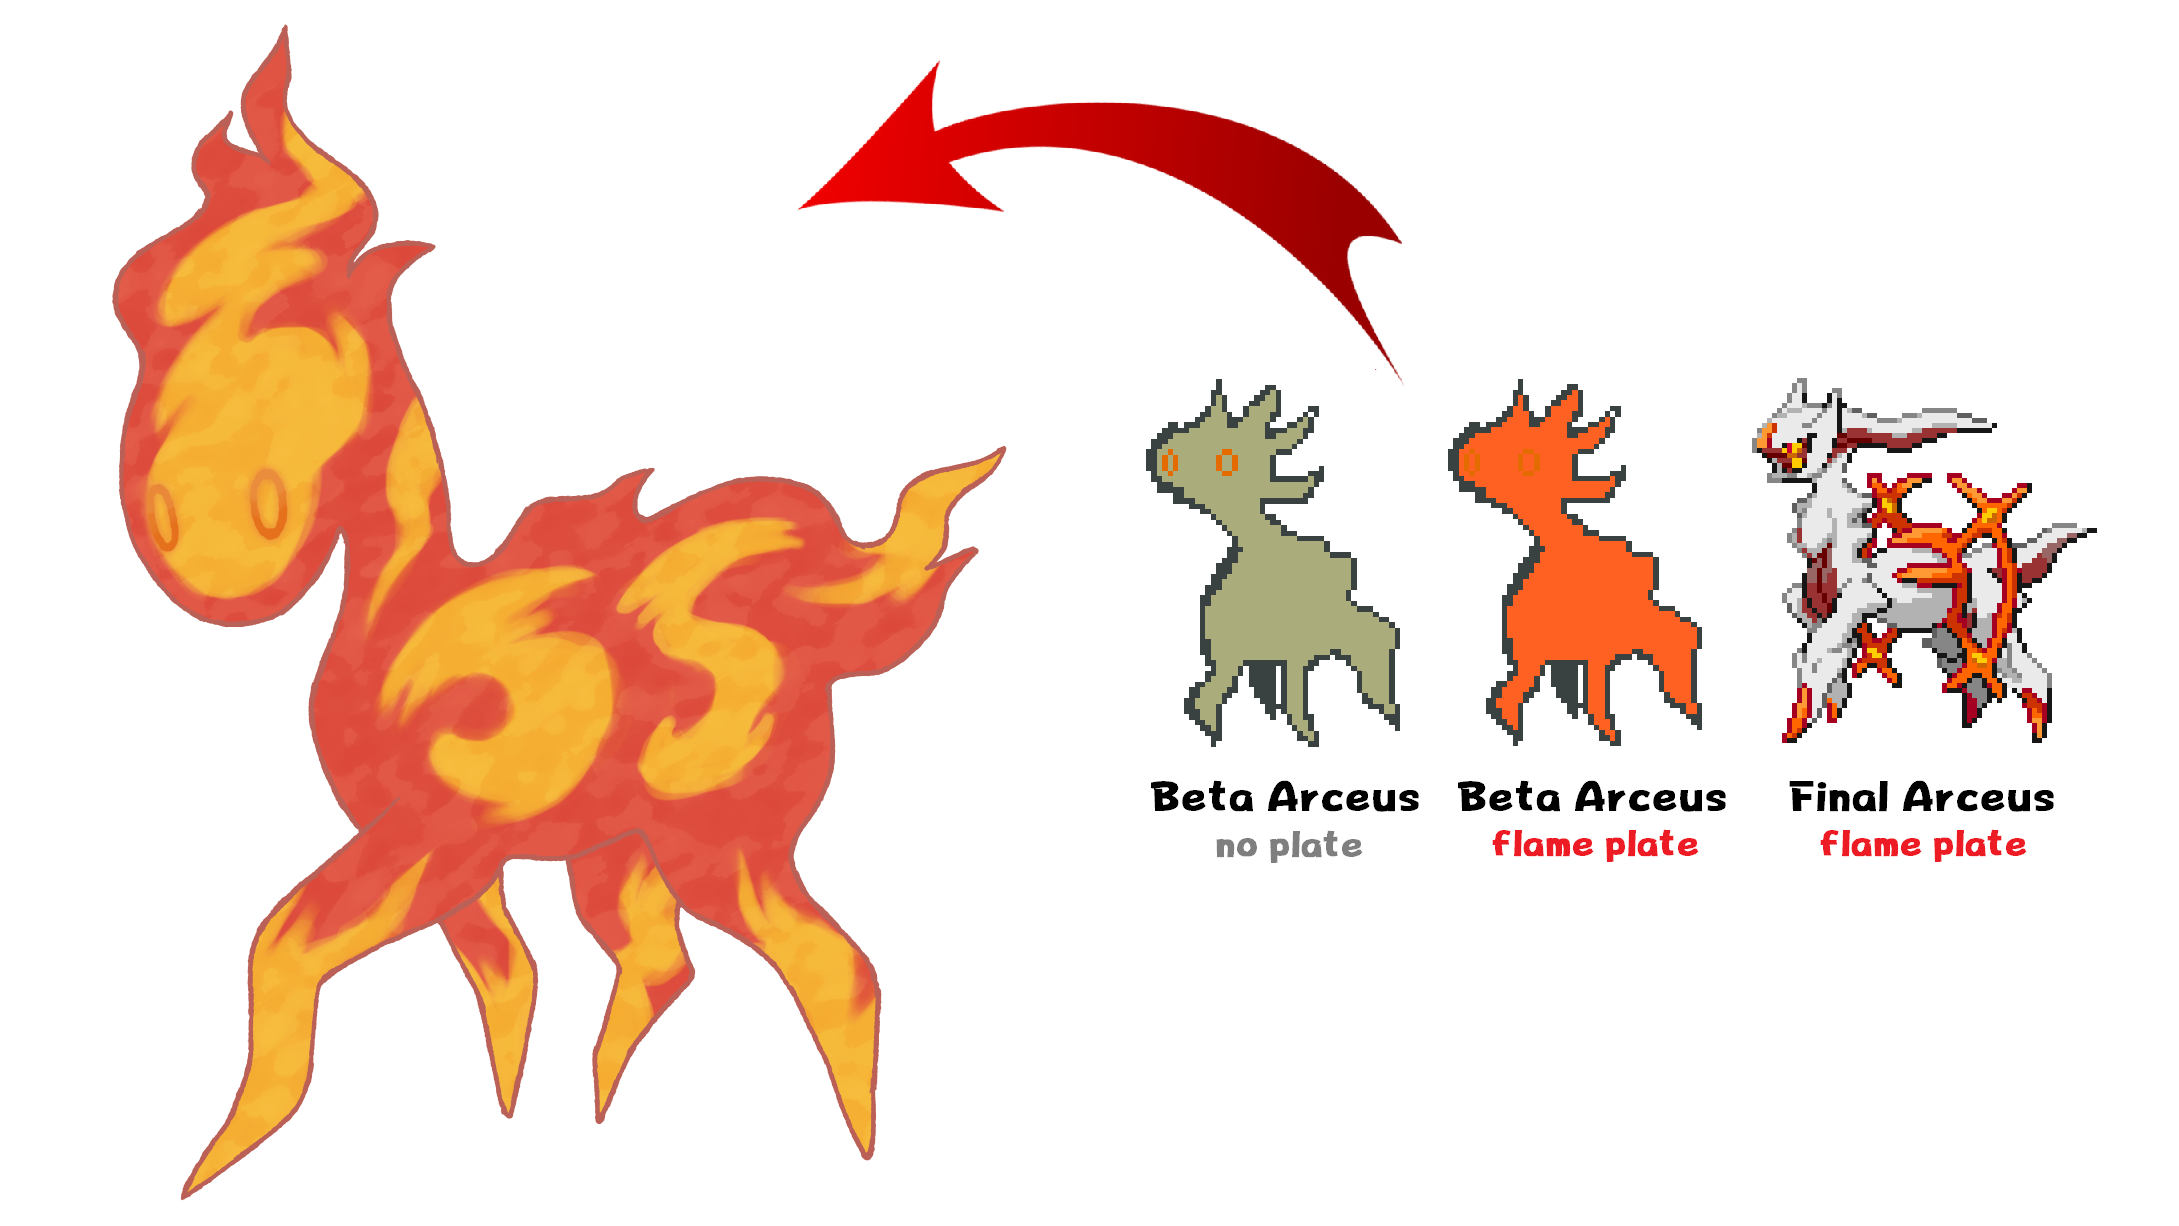 Dr Lava S Lost Pokemon Beta Arceus Flame Plate Arceus Placeholder Sprite In The Gen 4 Leak Got Lots Of Attention But Some Folks Didn T Realize The Leak Included 17 Alternate